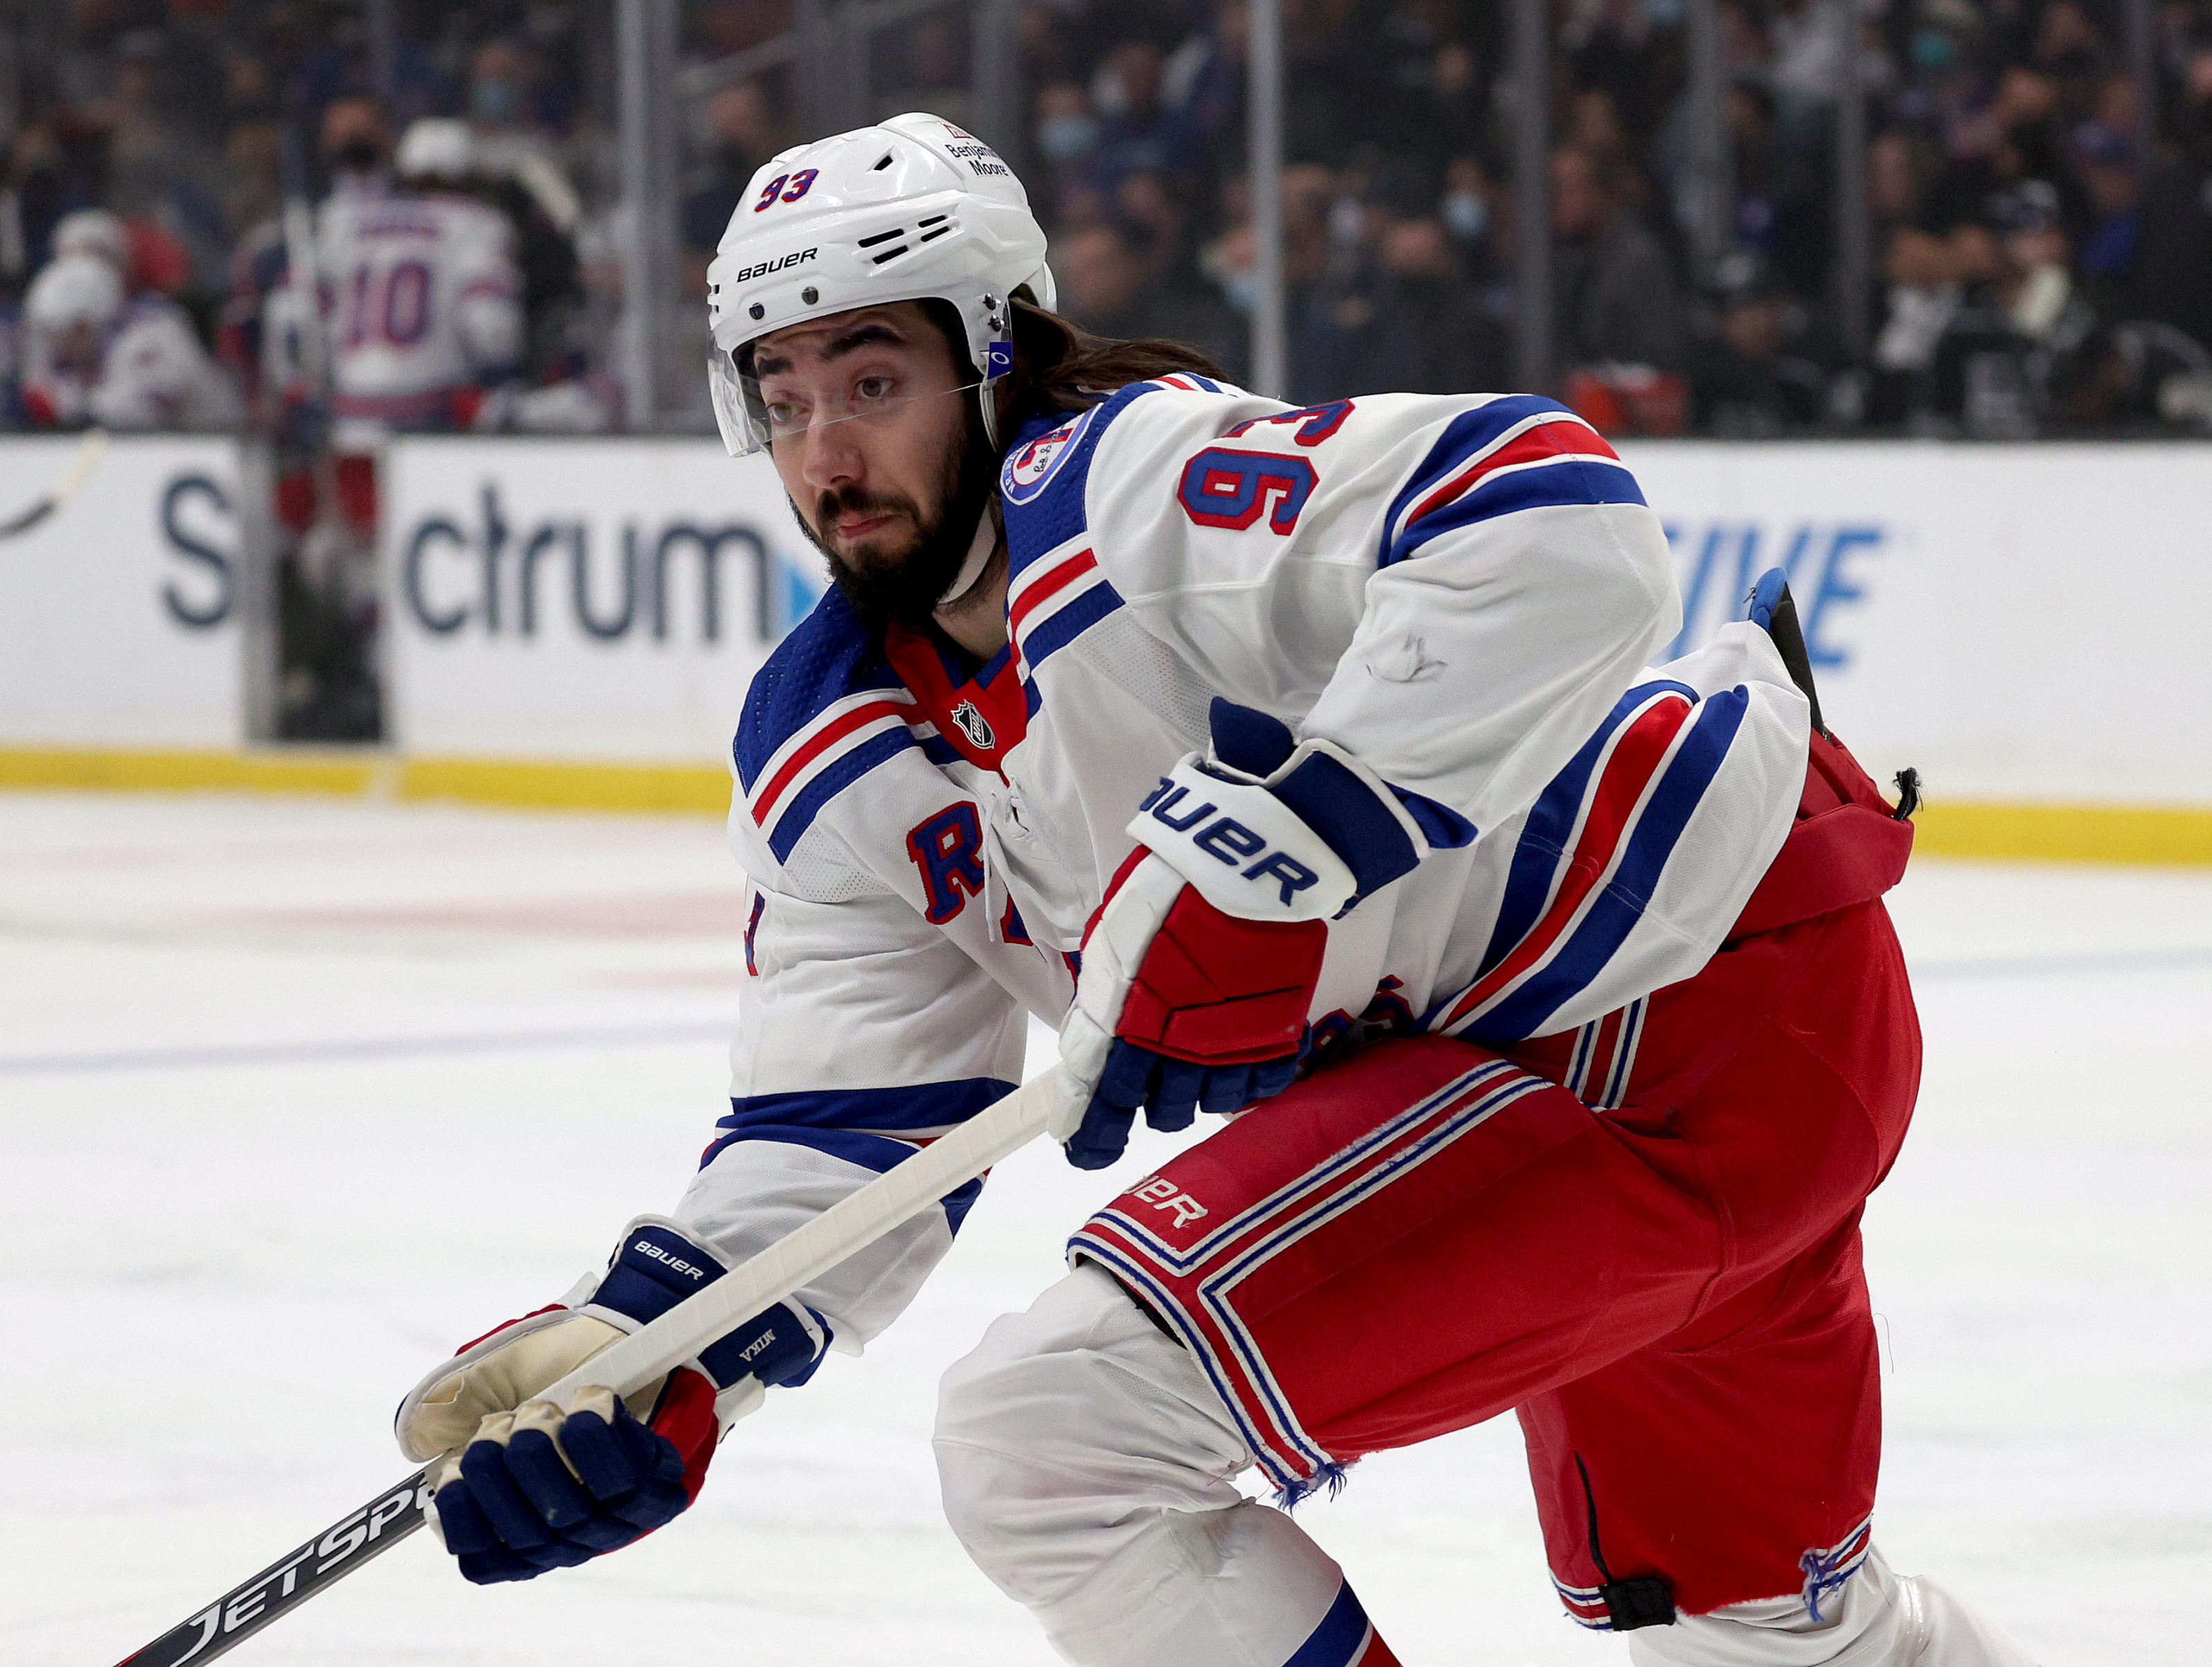 New York Rangers: Let Zibanejad's recovery play its natural course